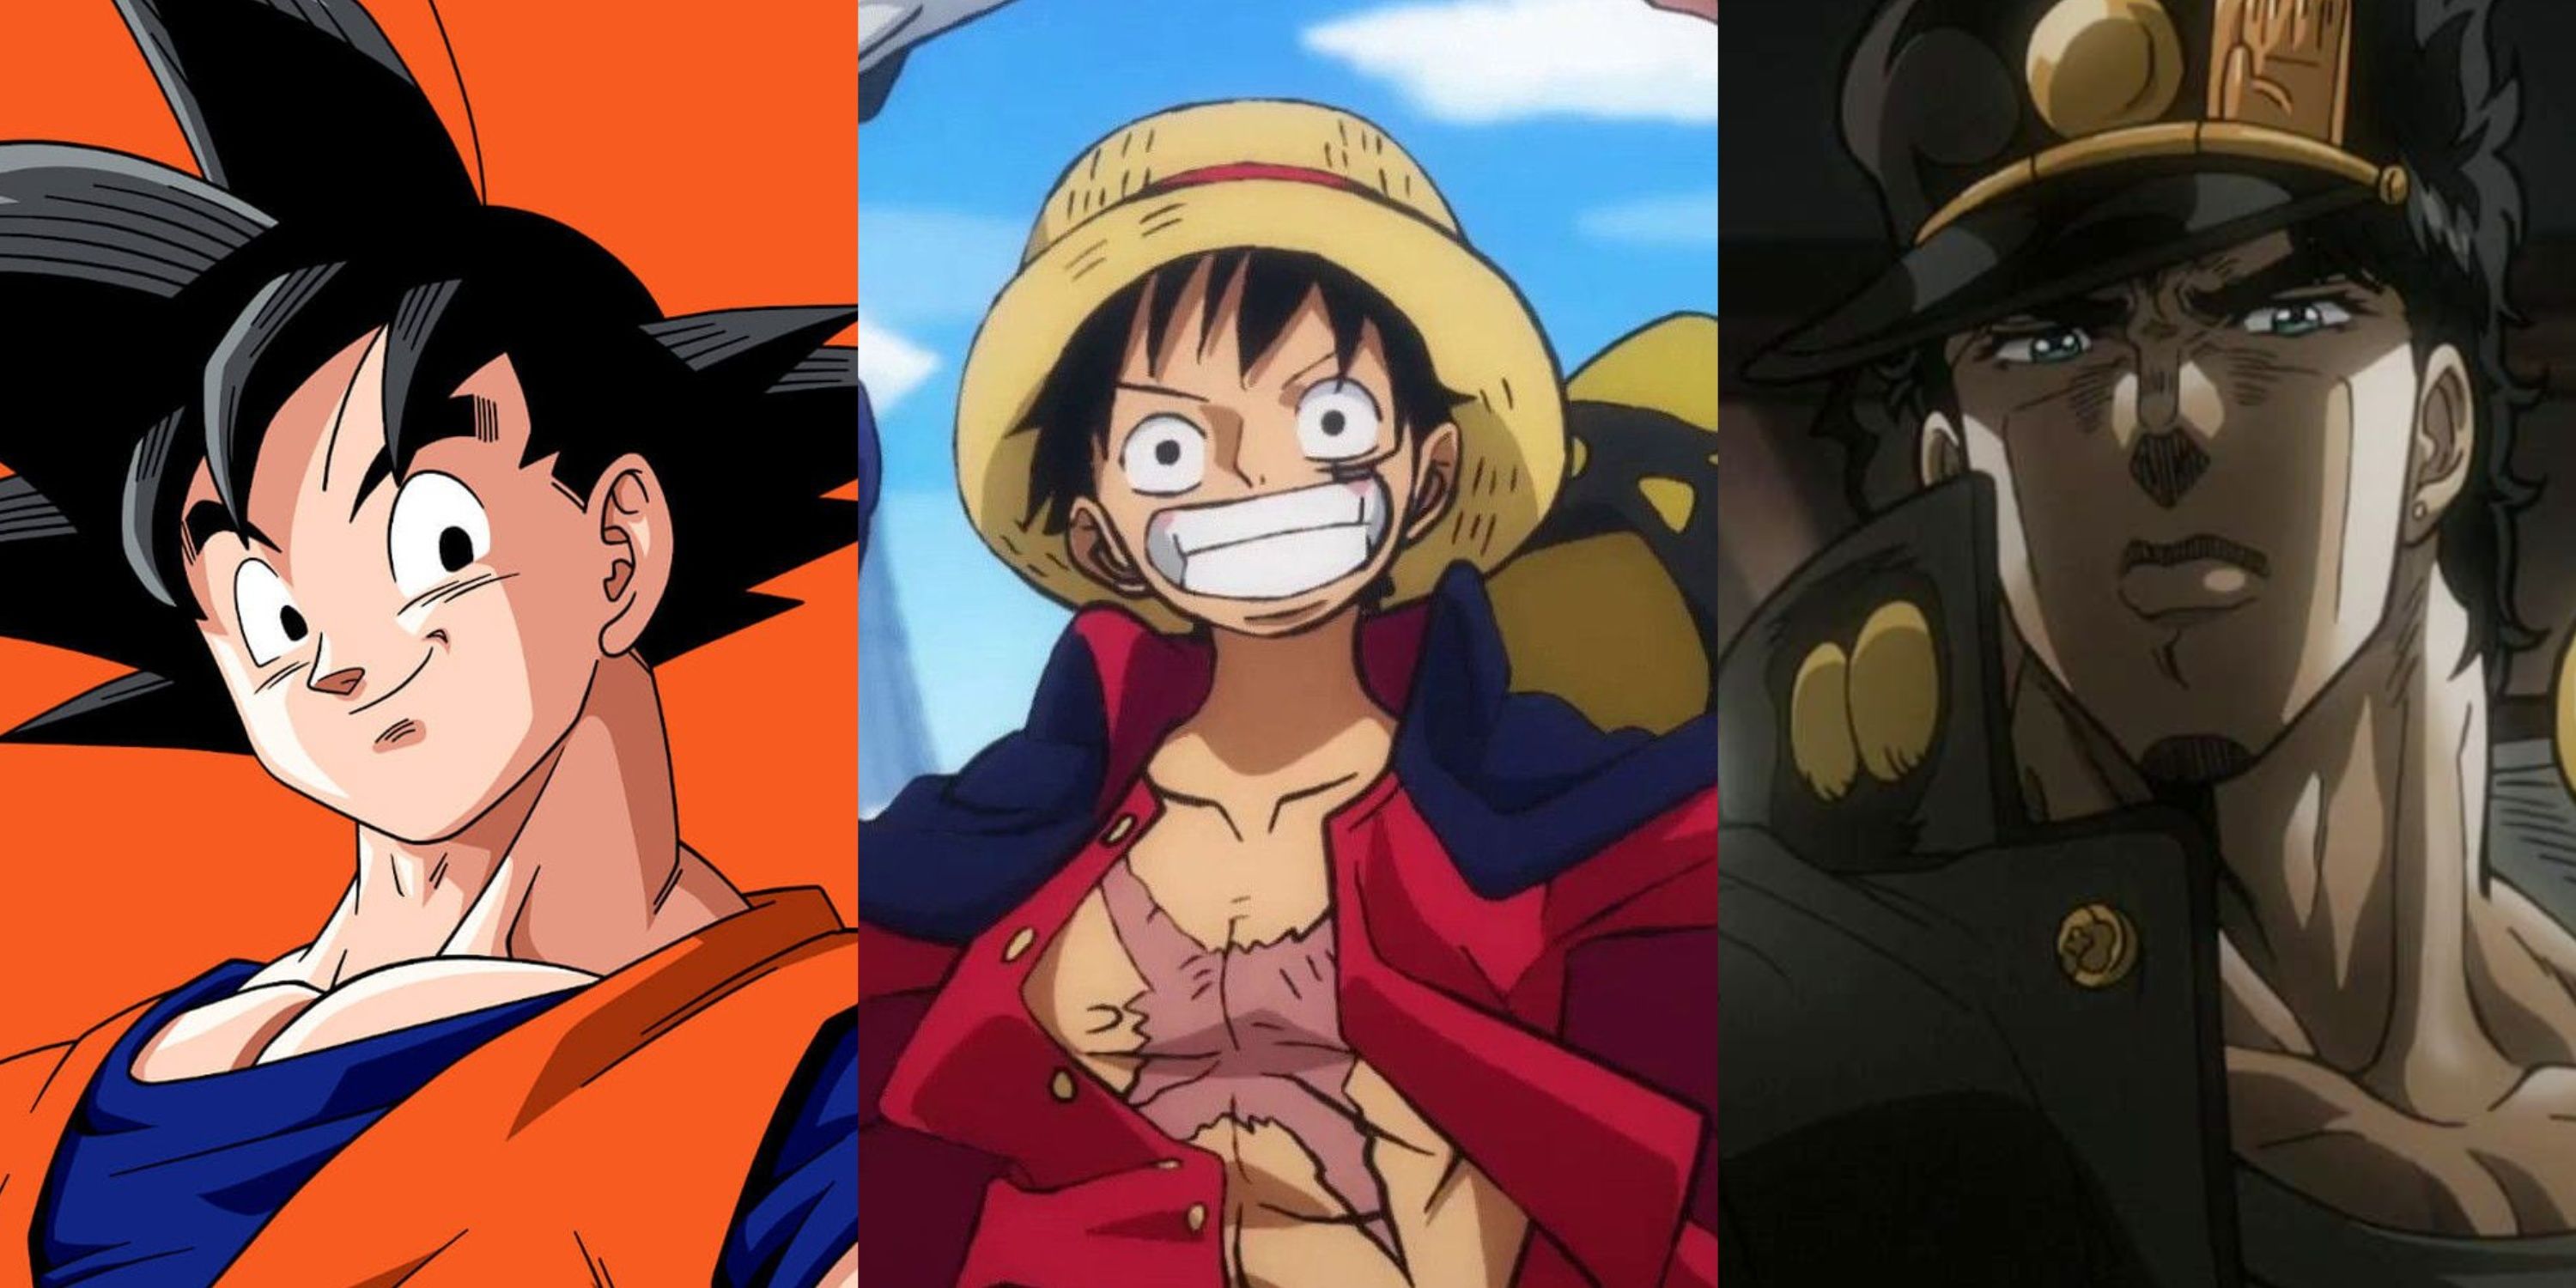 Ranking Popular Shonen Anime By How Good Their Plots Are